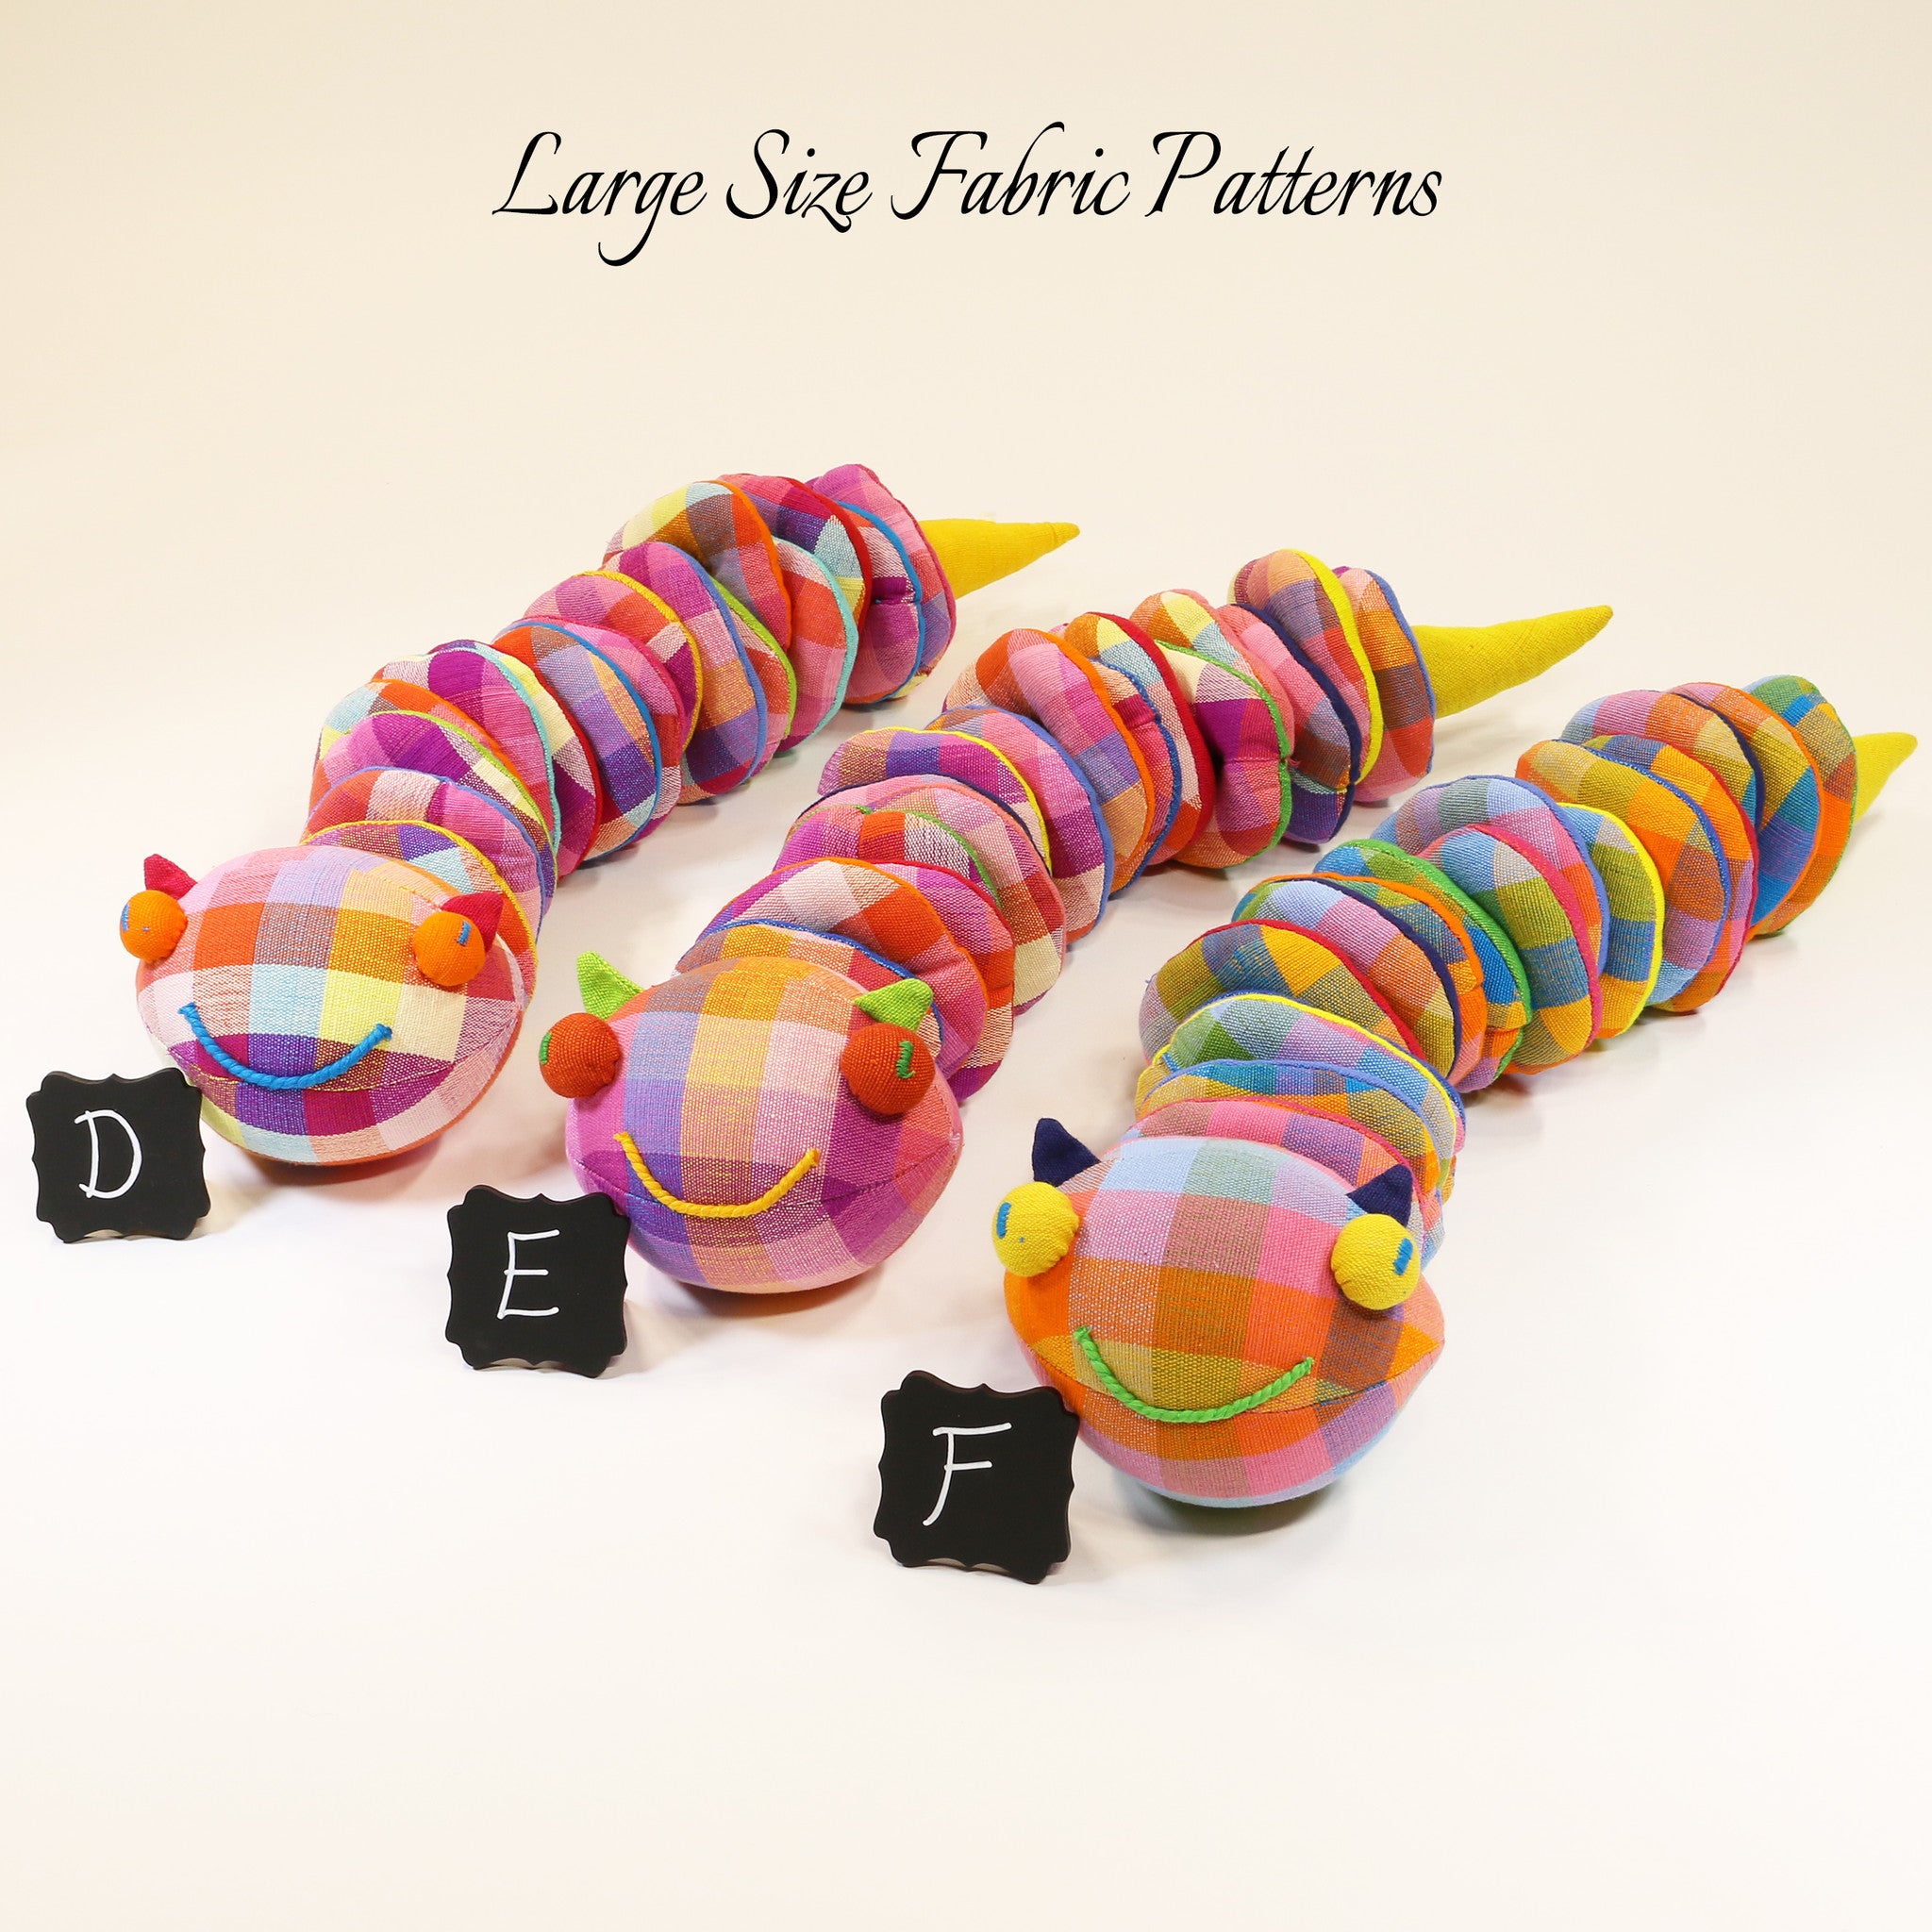 Casey, the Caterpillar – large size fabric patterns shown